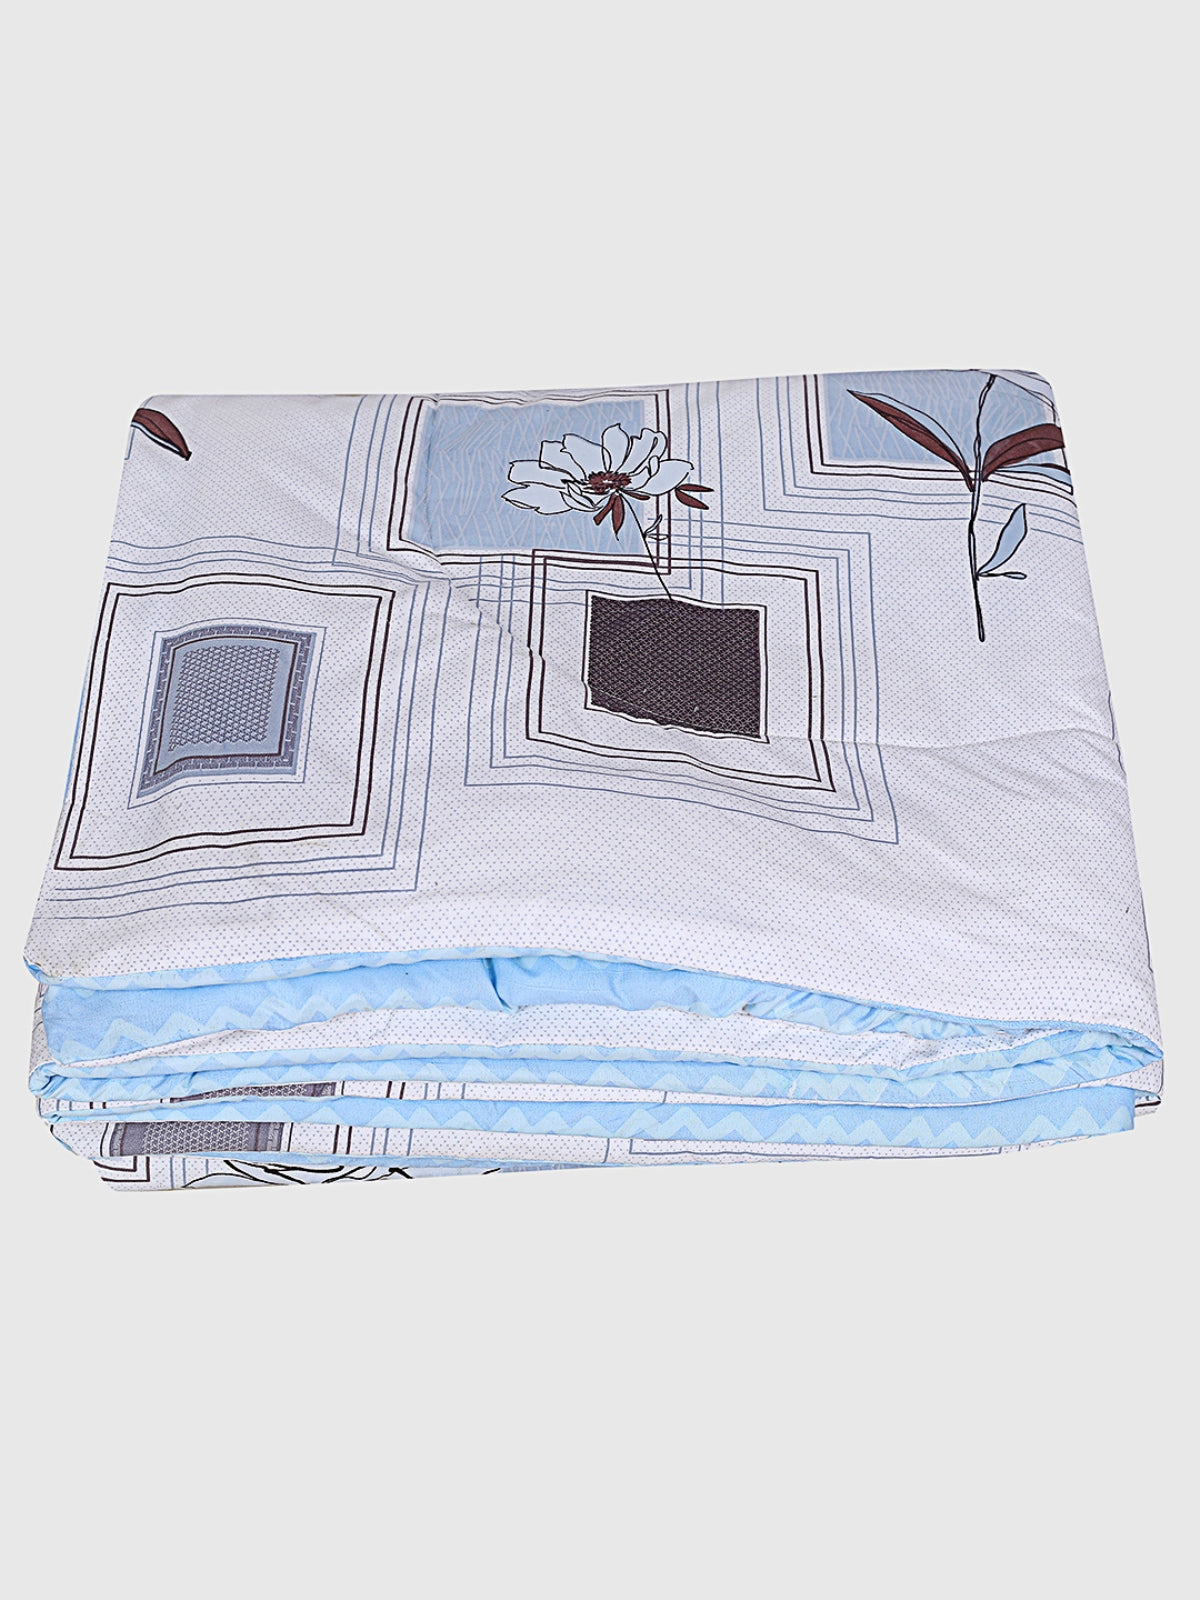 Blue & White Floral Patterned 200 GSM Reversible AC Comforter